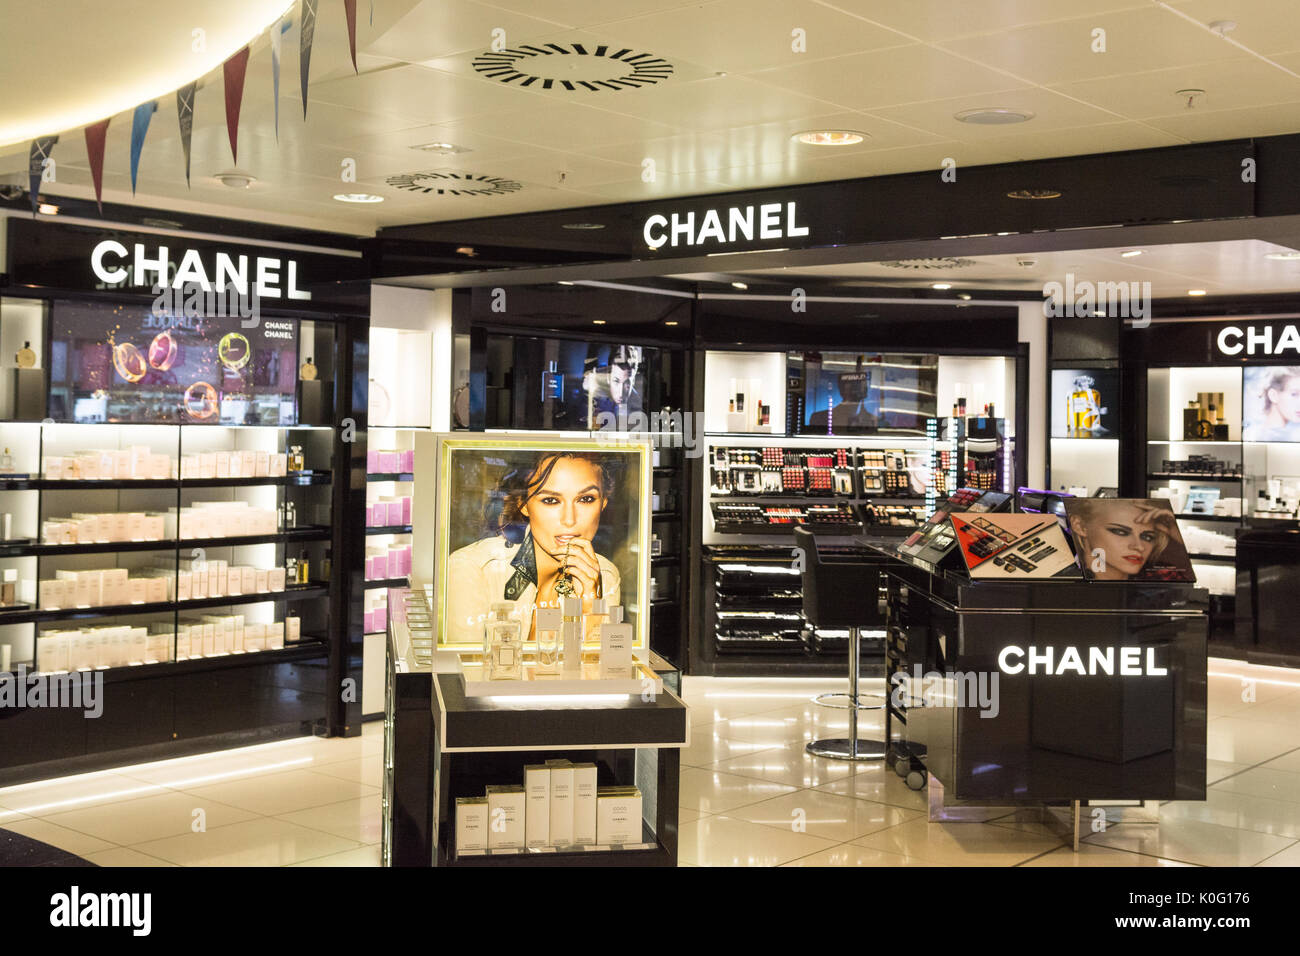 Chanel counter stock and images - Alamy